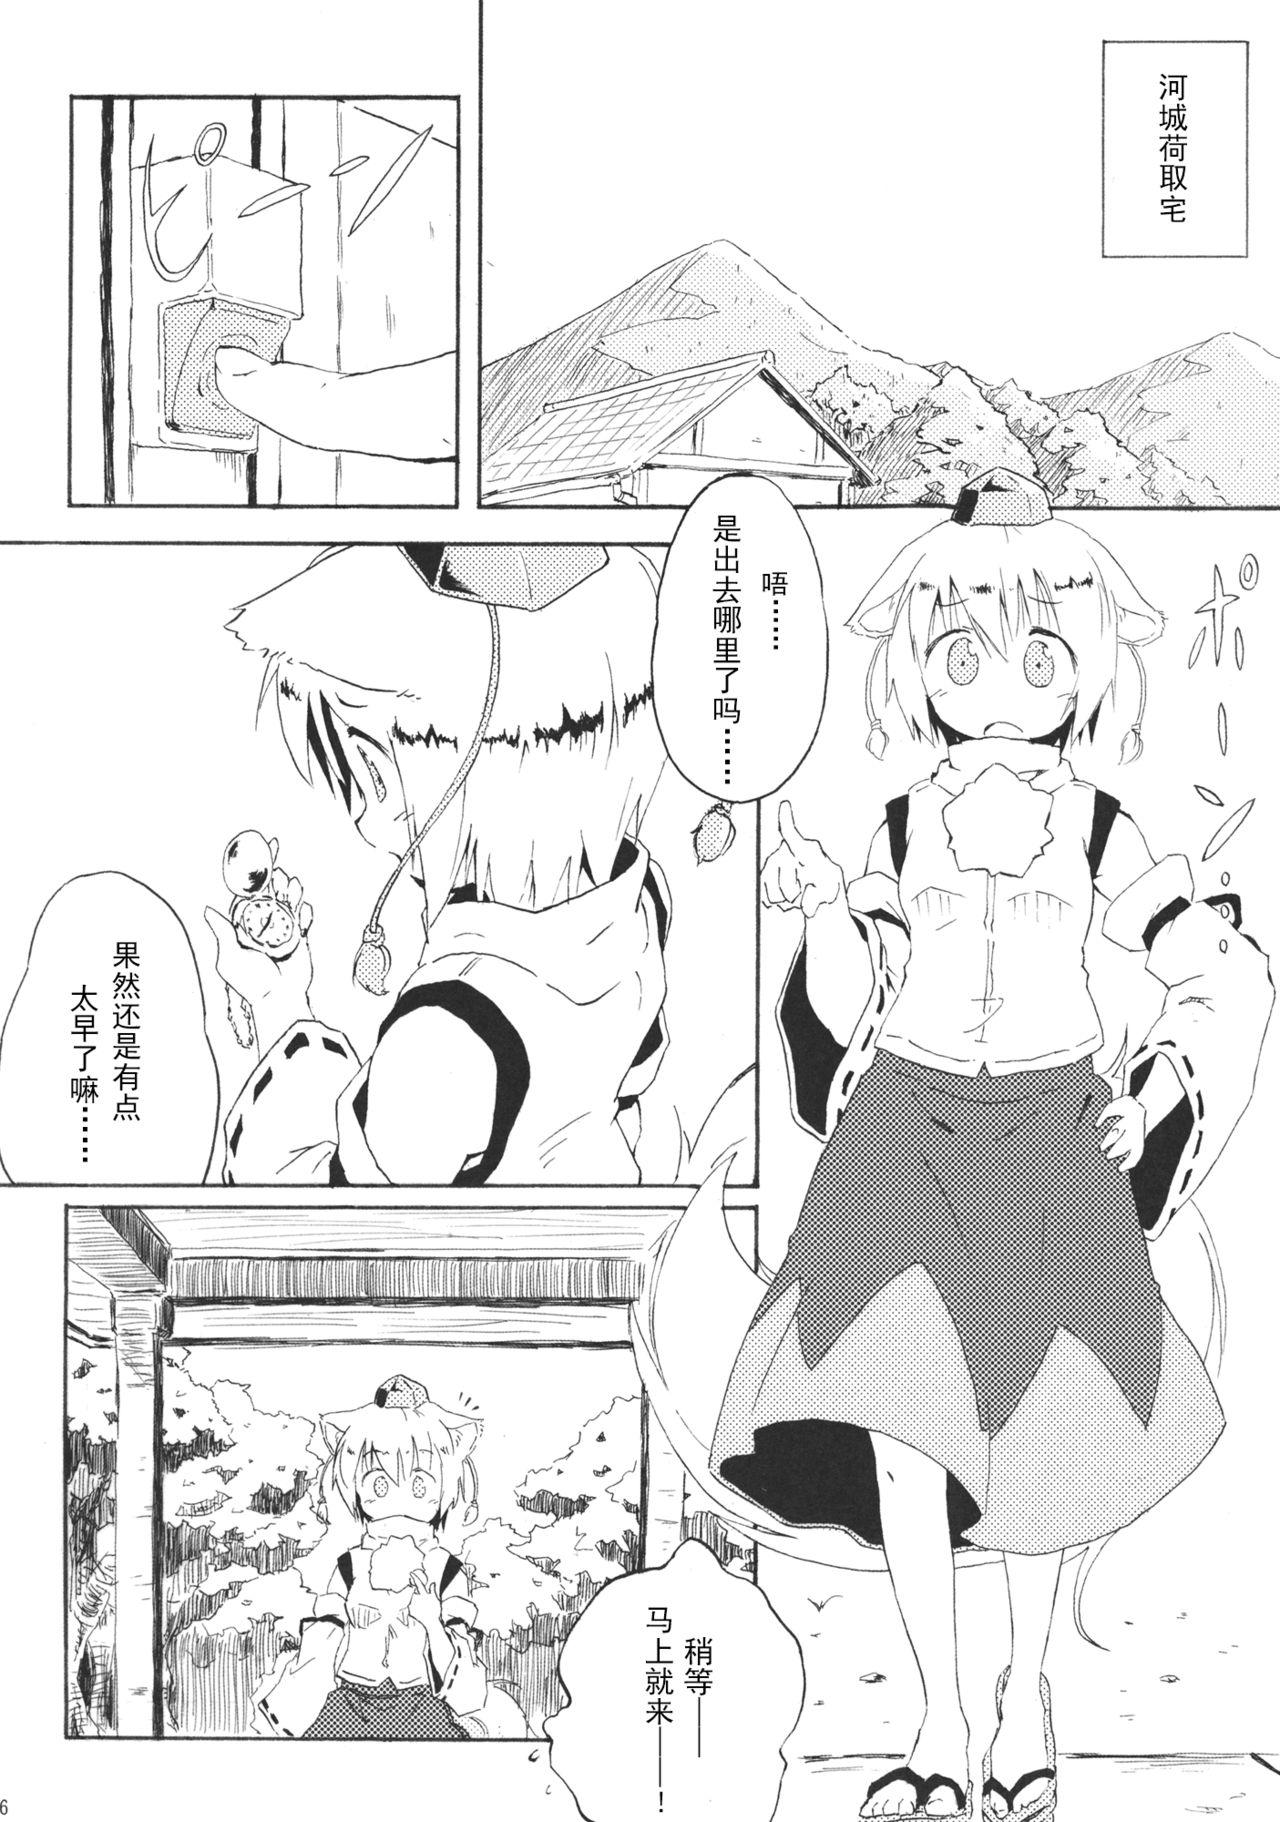  Momijium Nitrite - Touhou project Ejaculations - Page 6